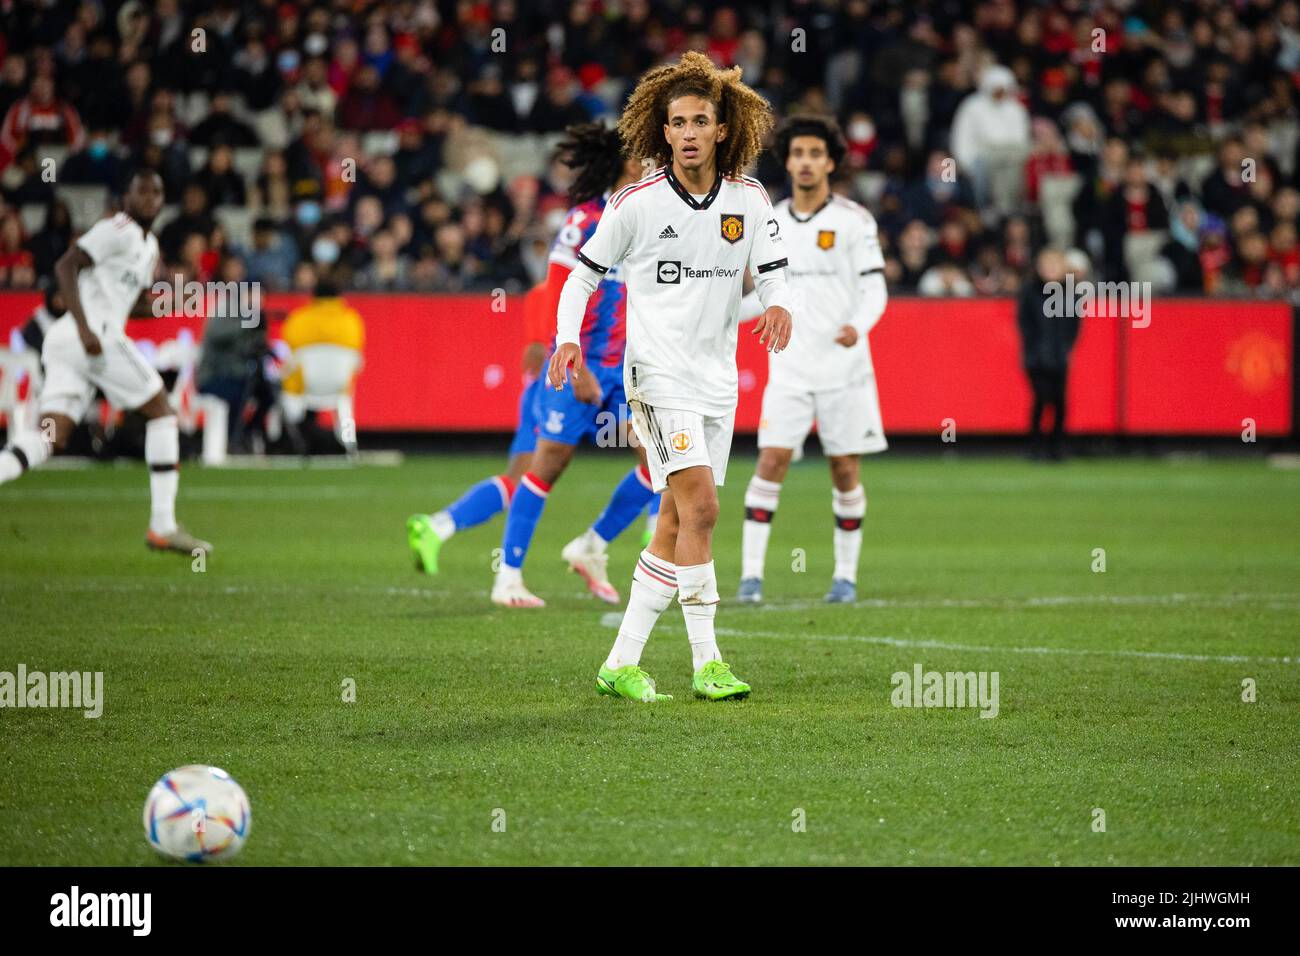 Melbourne, Australia. 19th July, 2022. Hannibal Mejbri of Manchester United eyes the ball during the Pre-Season Friendly match between Manchester United and Crystal Palace at Melbourne Cricket Ground. Manchester United defeated Crystal Palace 3-1. Credit: SOPA Images Limited/Alamy Live News Stock Photo